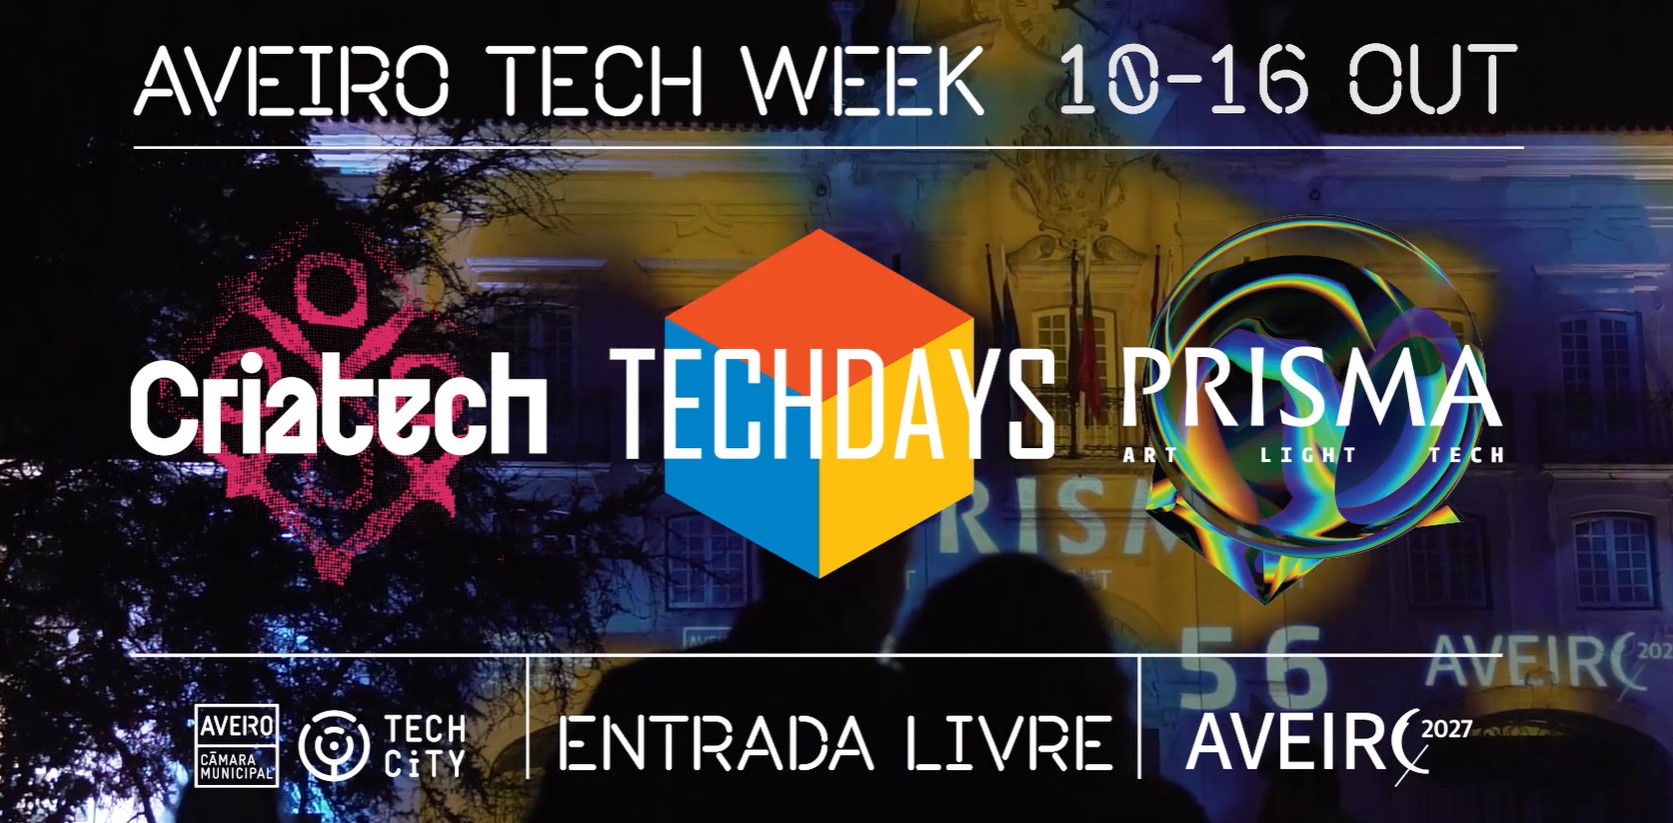 Aveiro Tech Week brings together national and international speakers to debate the importance of technology in city management